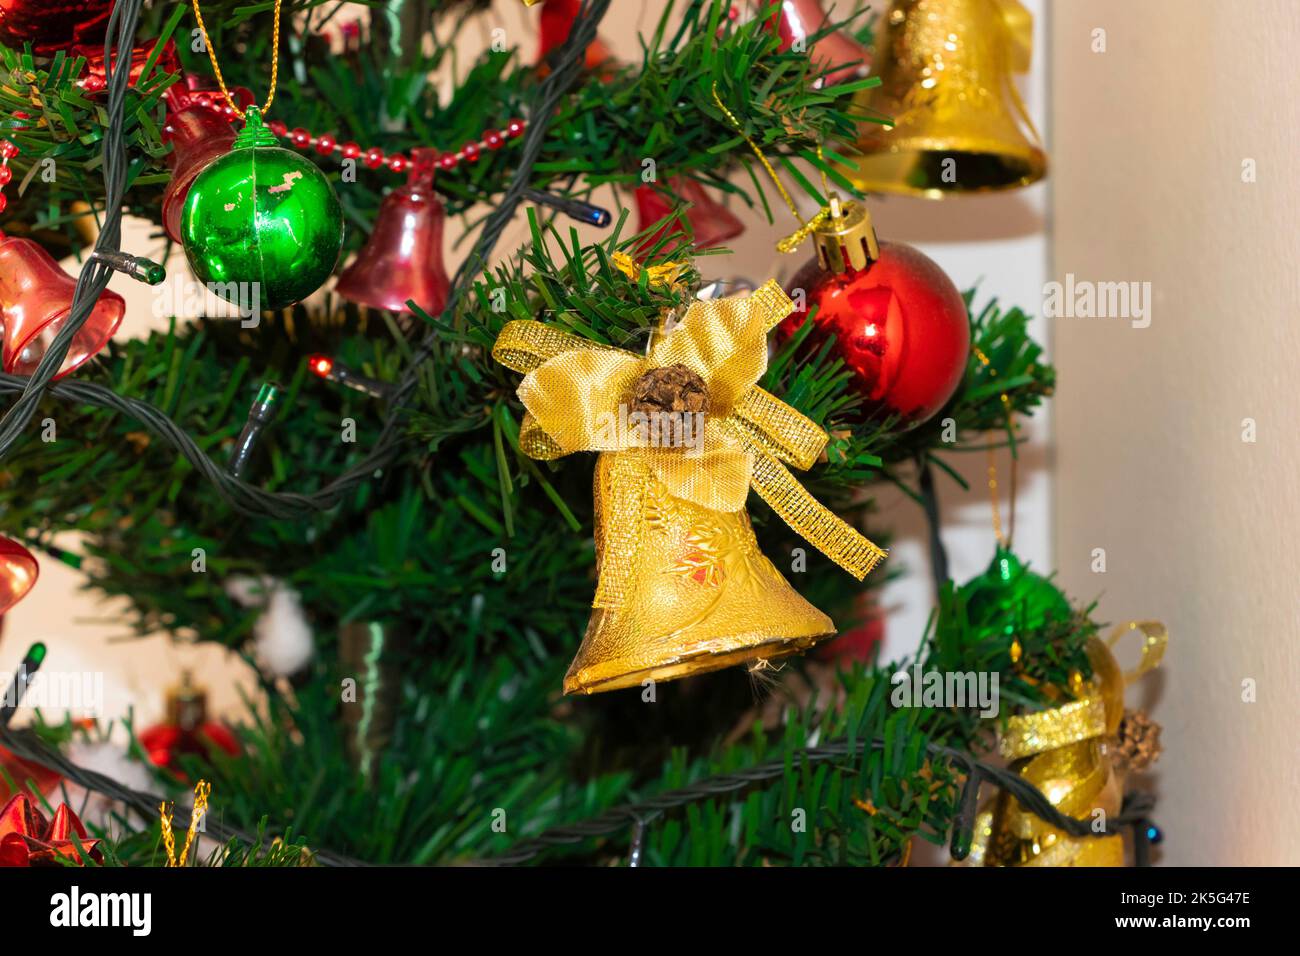 Closeup image Of Beautiful Christmas Tree With Ornaments Stock Photo